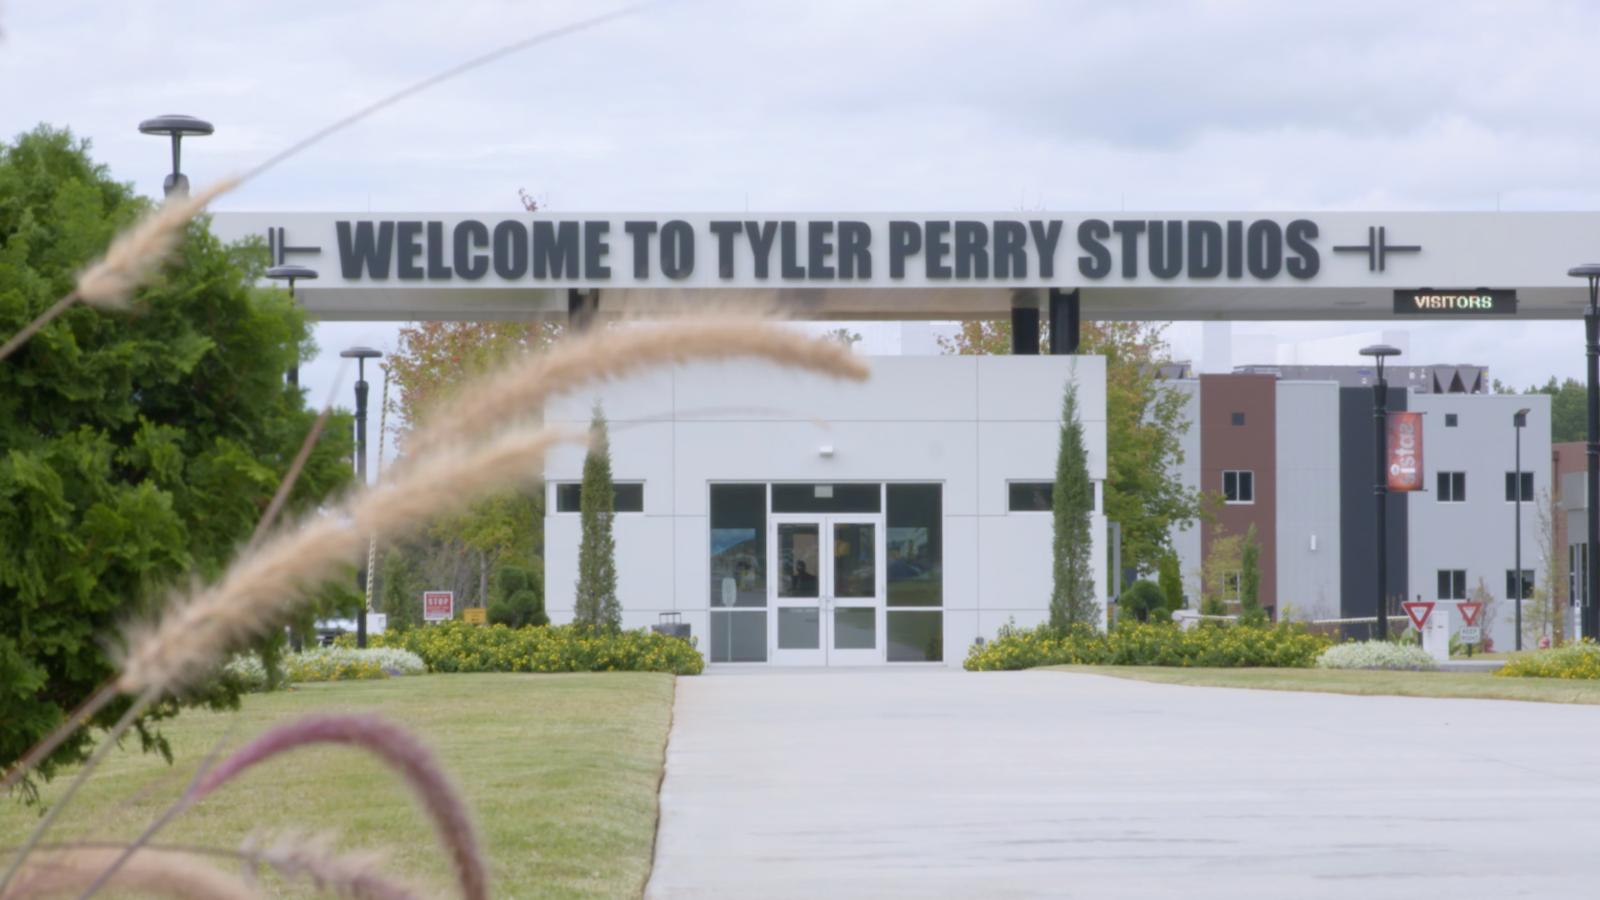 Take a tour of Tyler Perry's new studio CNN Video